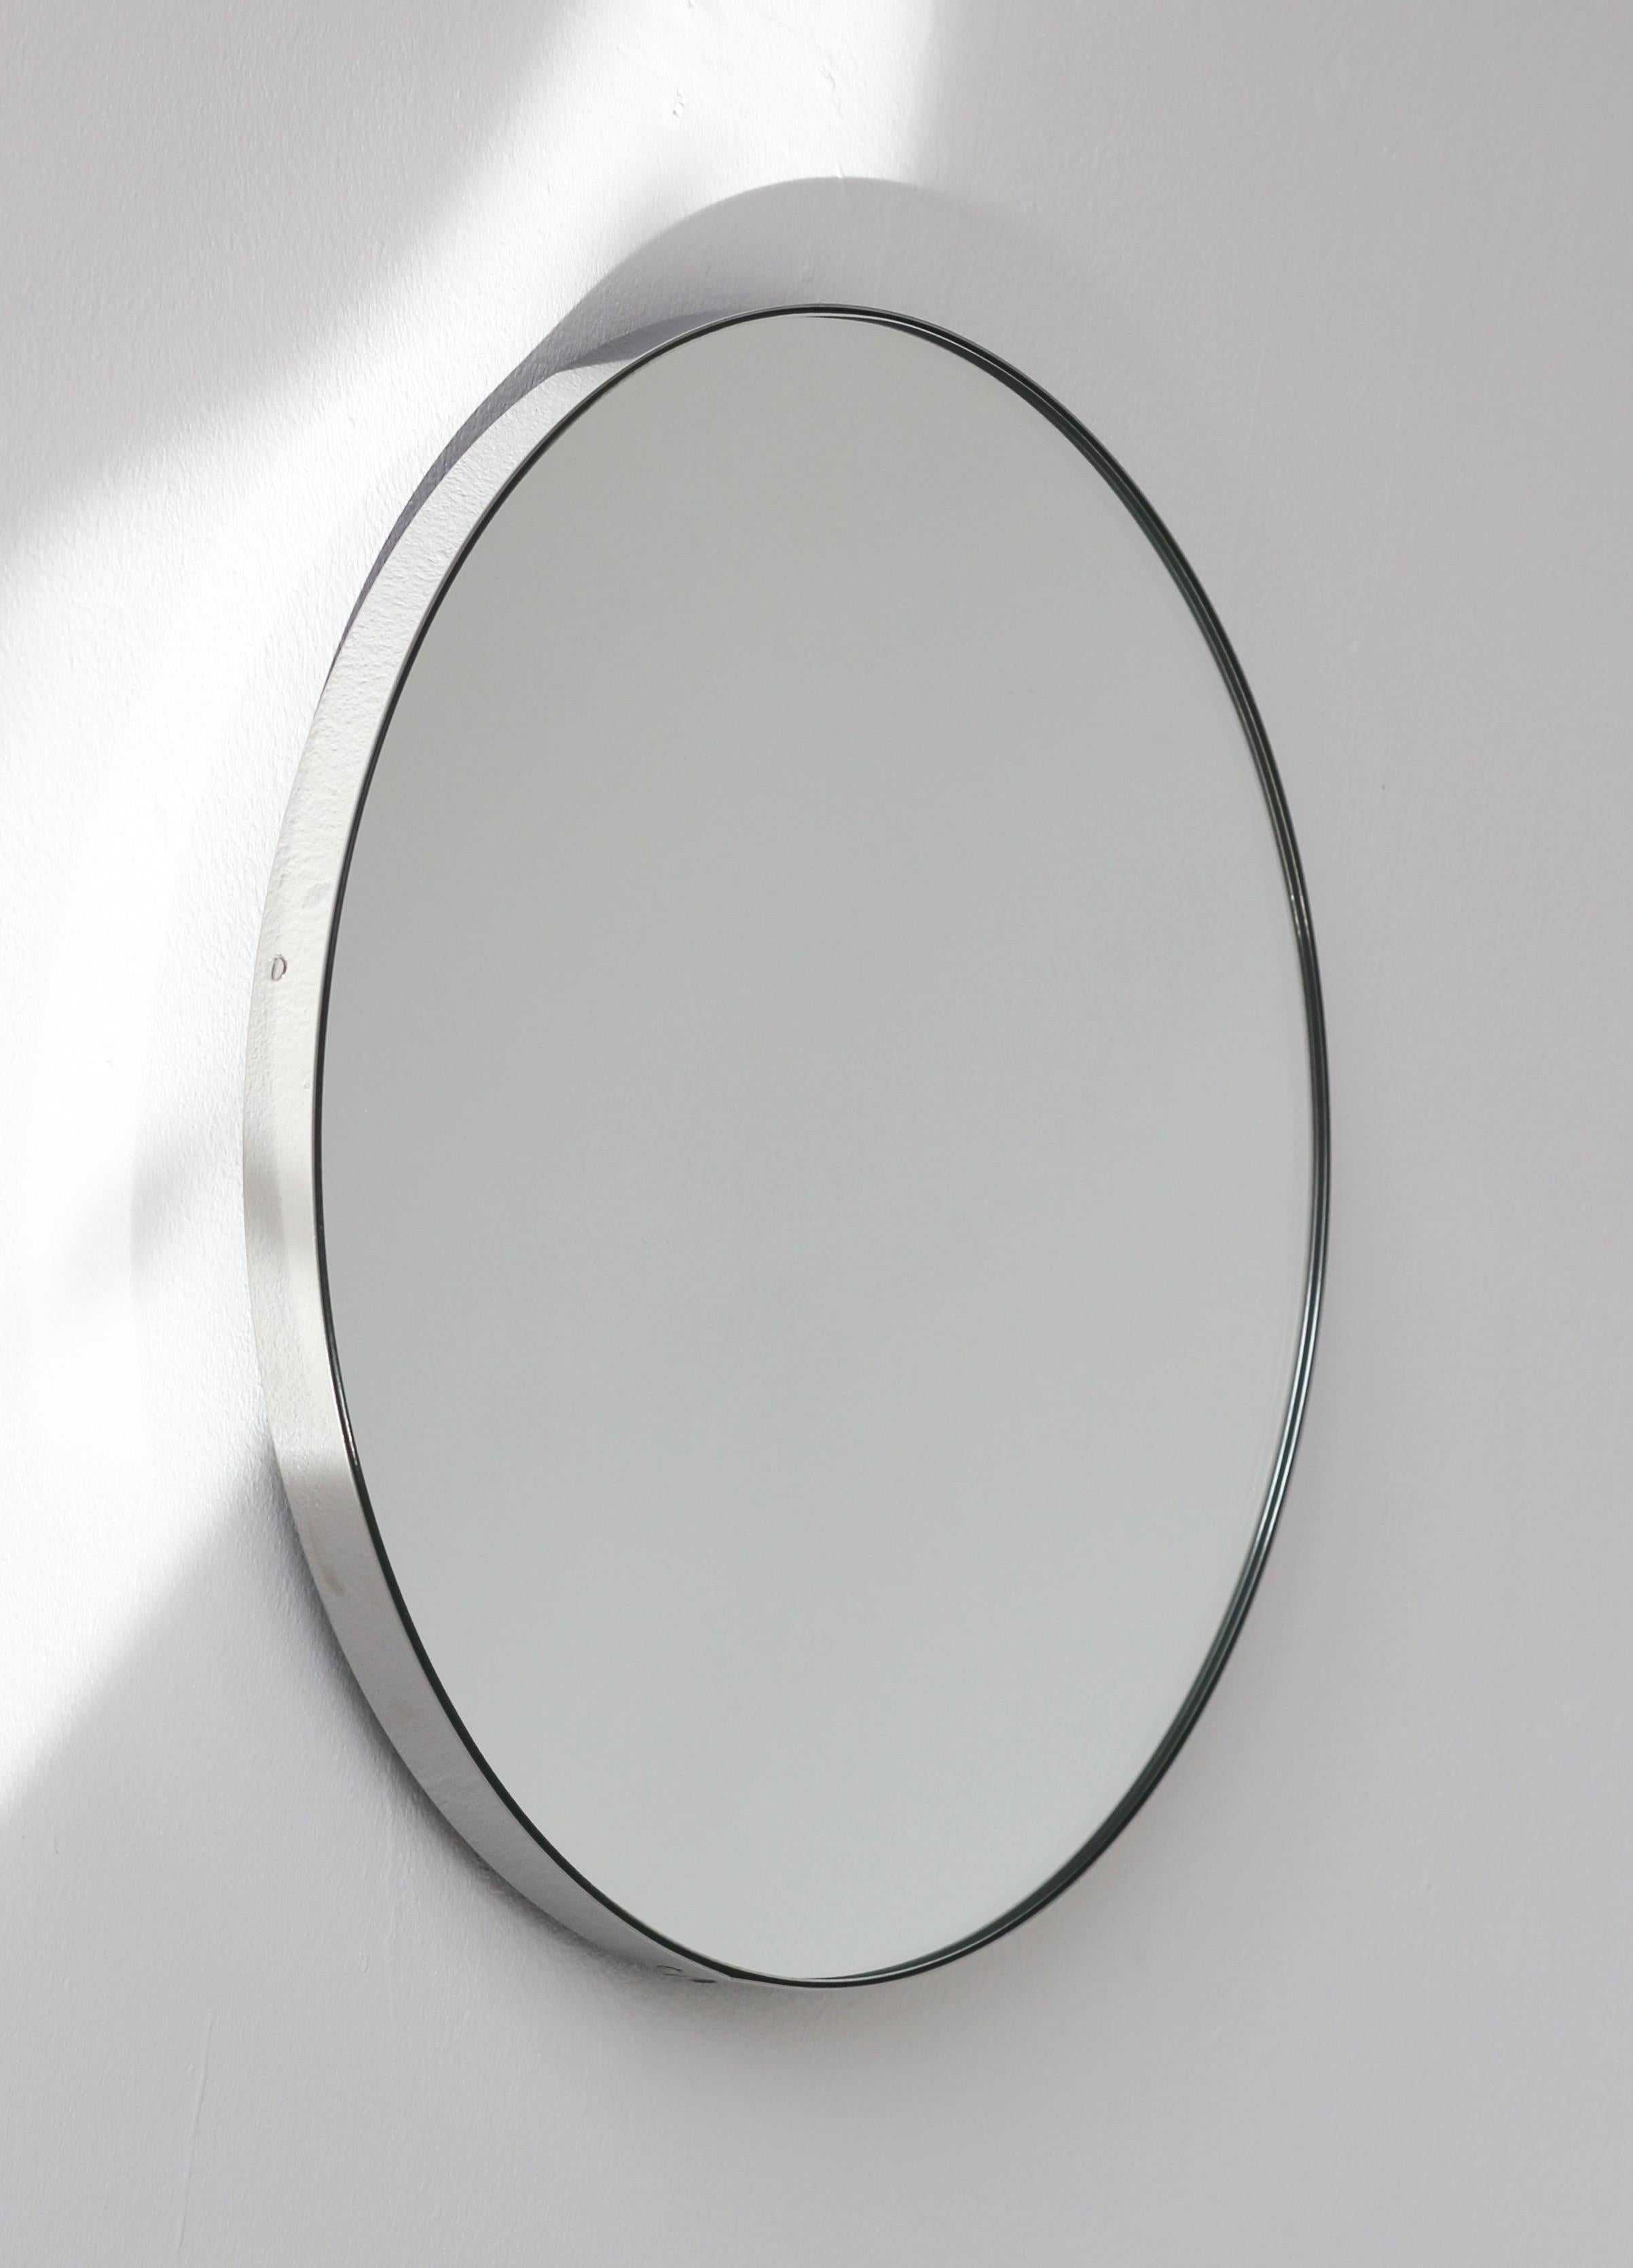 Contemporary Orbis Round Handcrafted Mirror with Minimalist Stainless Steel Frame, XL For Sale